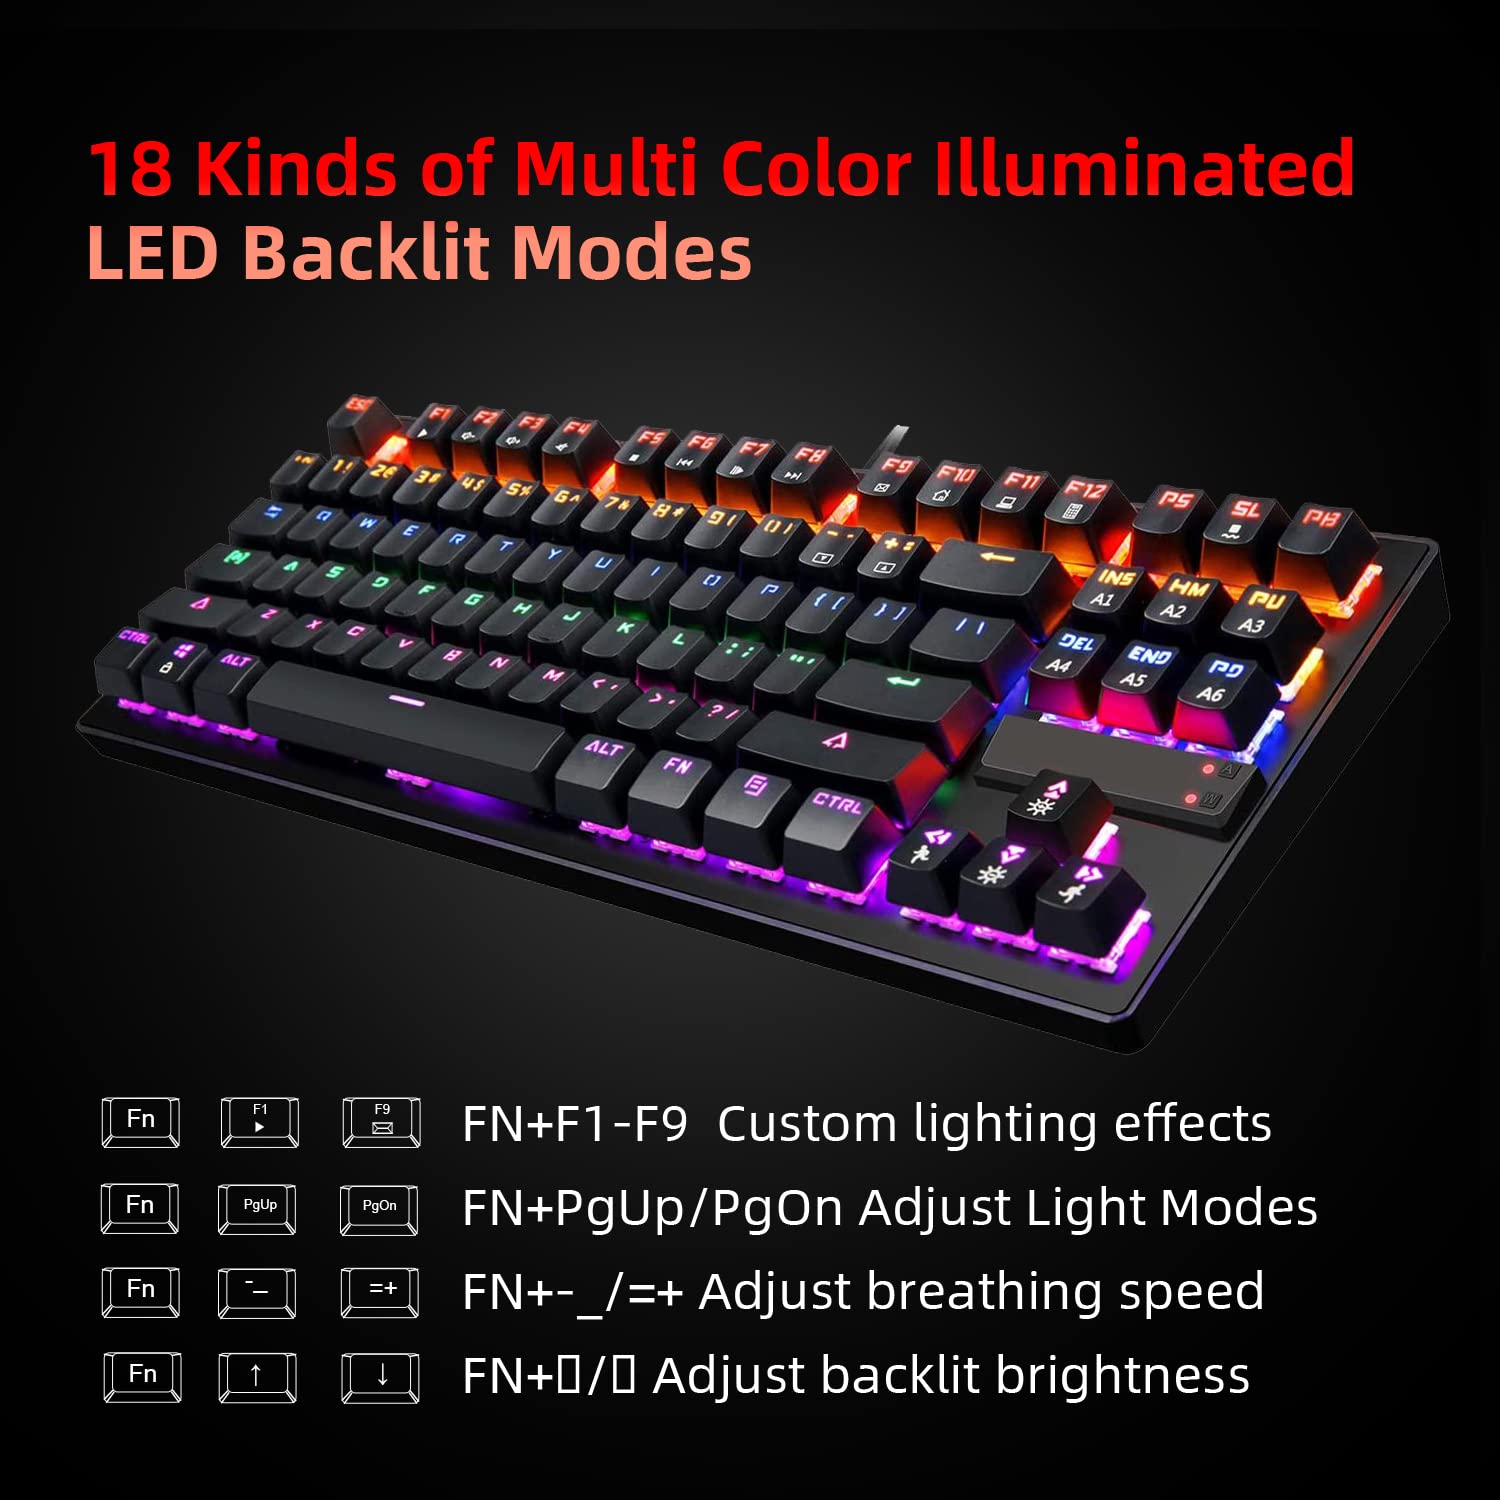 Anivia MK1S RGB LED Backlit Mechanical Gaming Keyboard,Wired USB Gaming Keyboards with Blue Switches, 87 Keys for Windows PC Laptop Game, Black